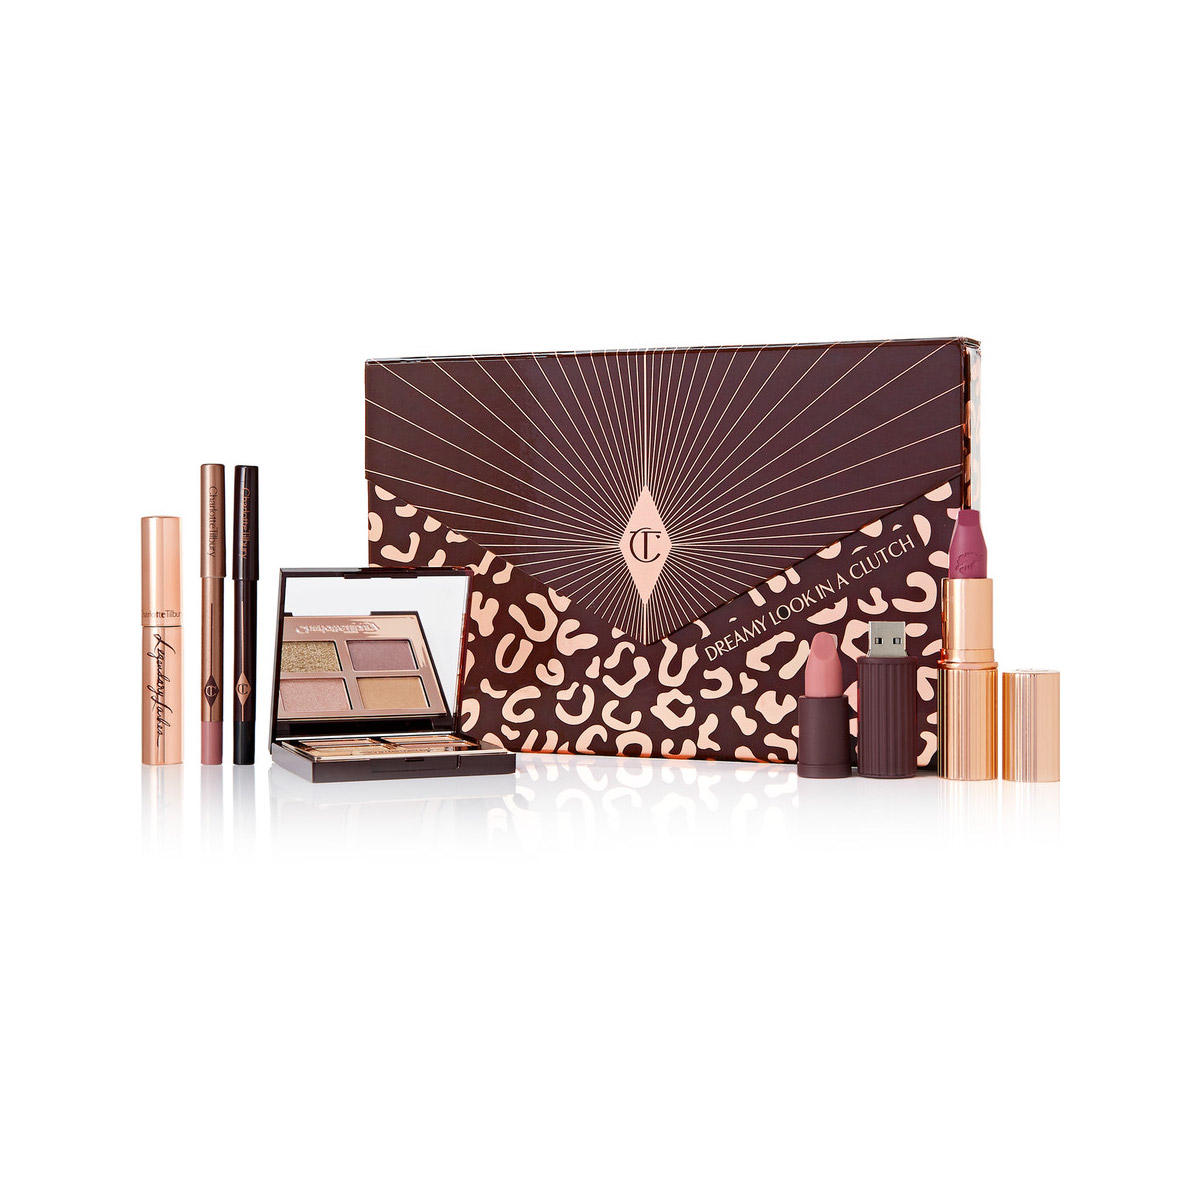 The Dreamy Look make up kit